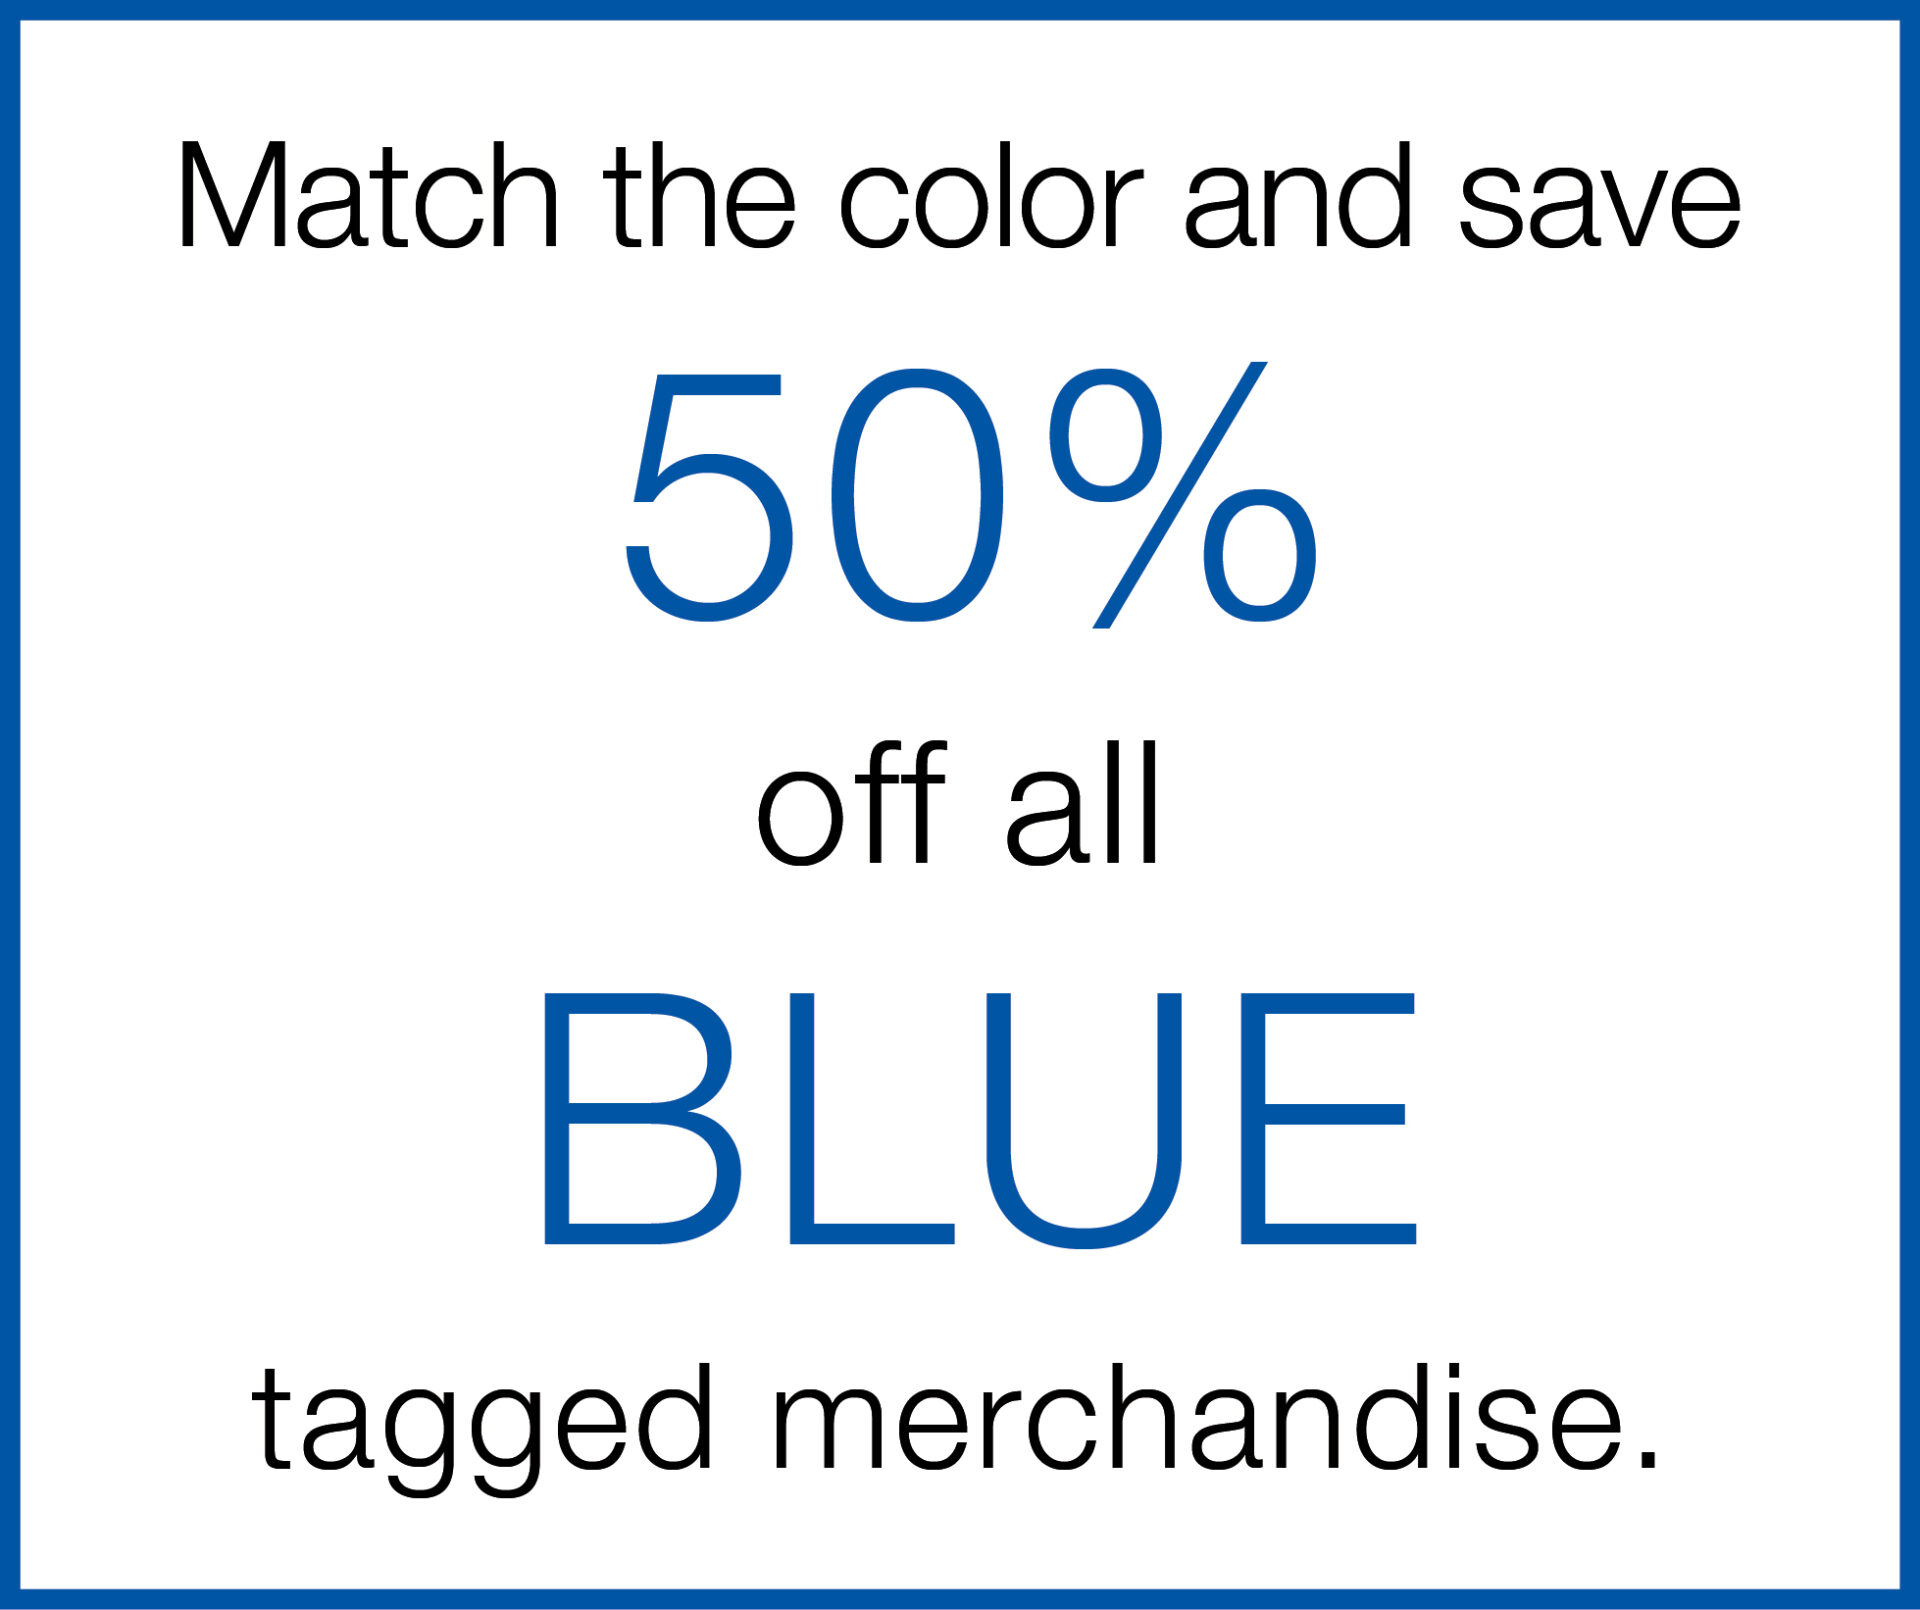 50% off all Blue tags